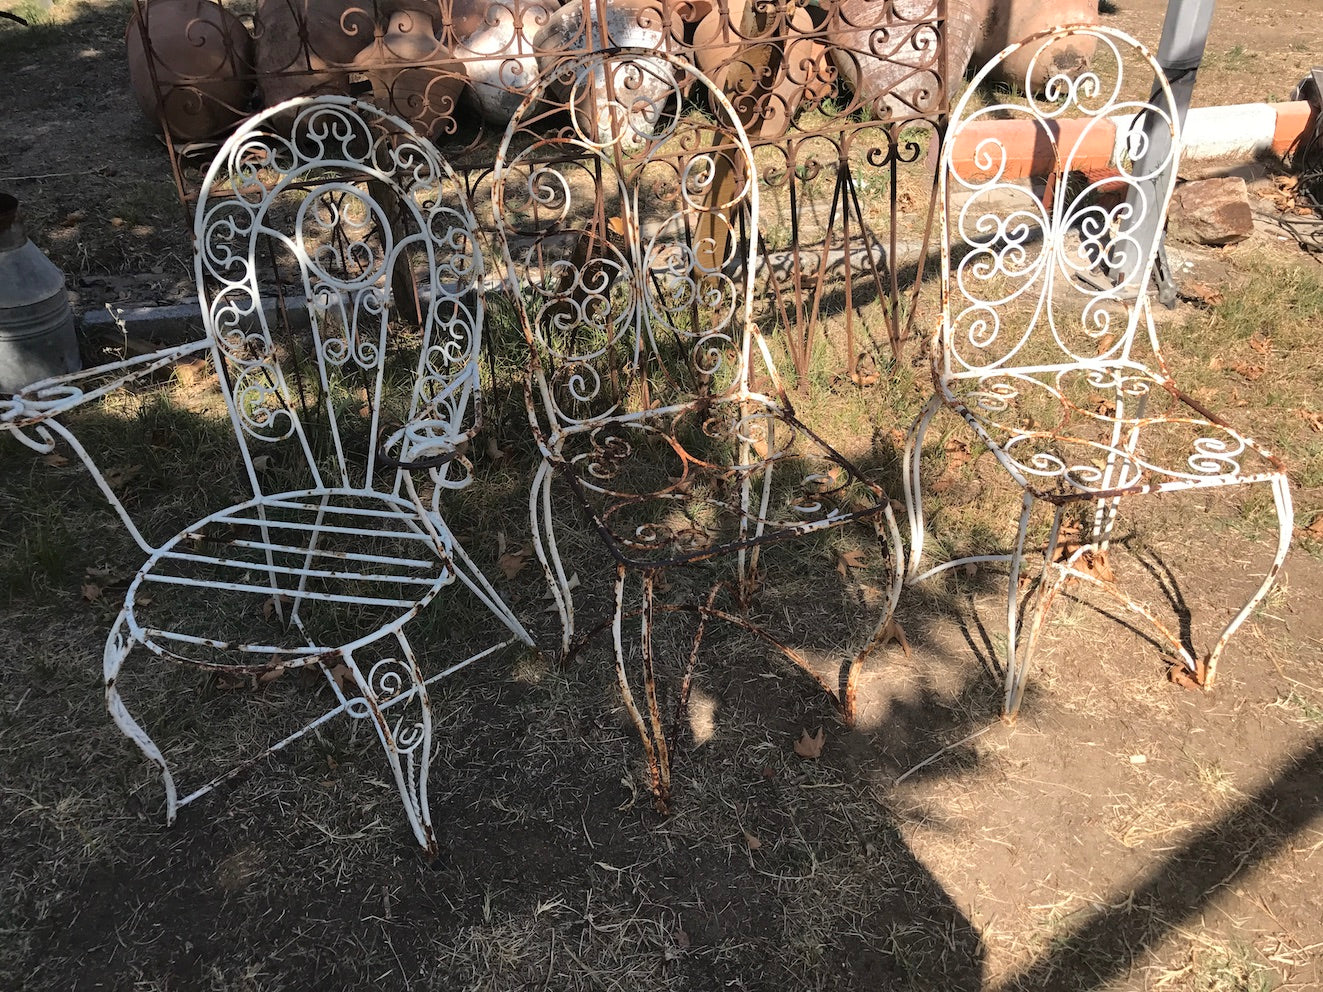 Vintage industrial wrought iron garden chairs #2019